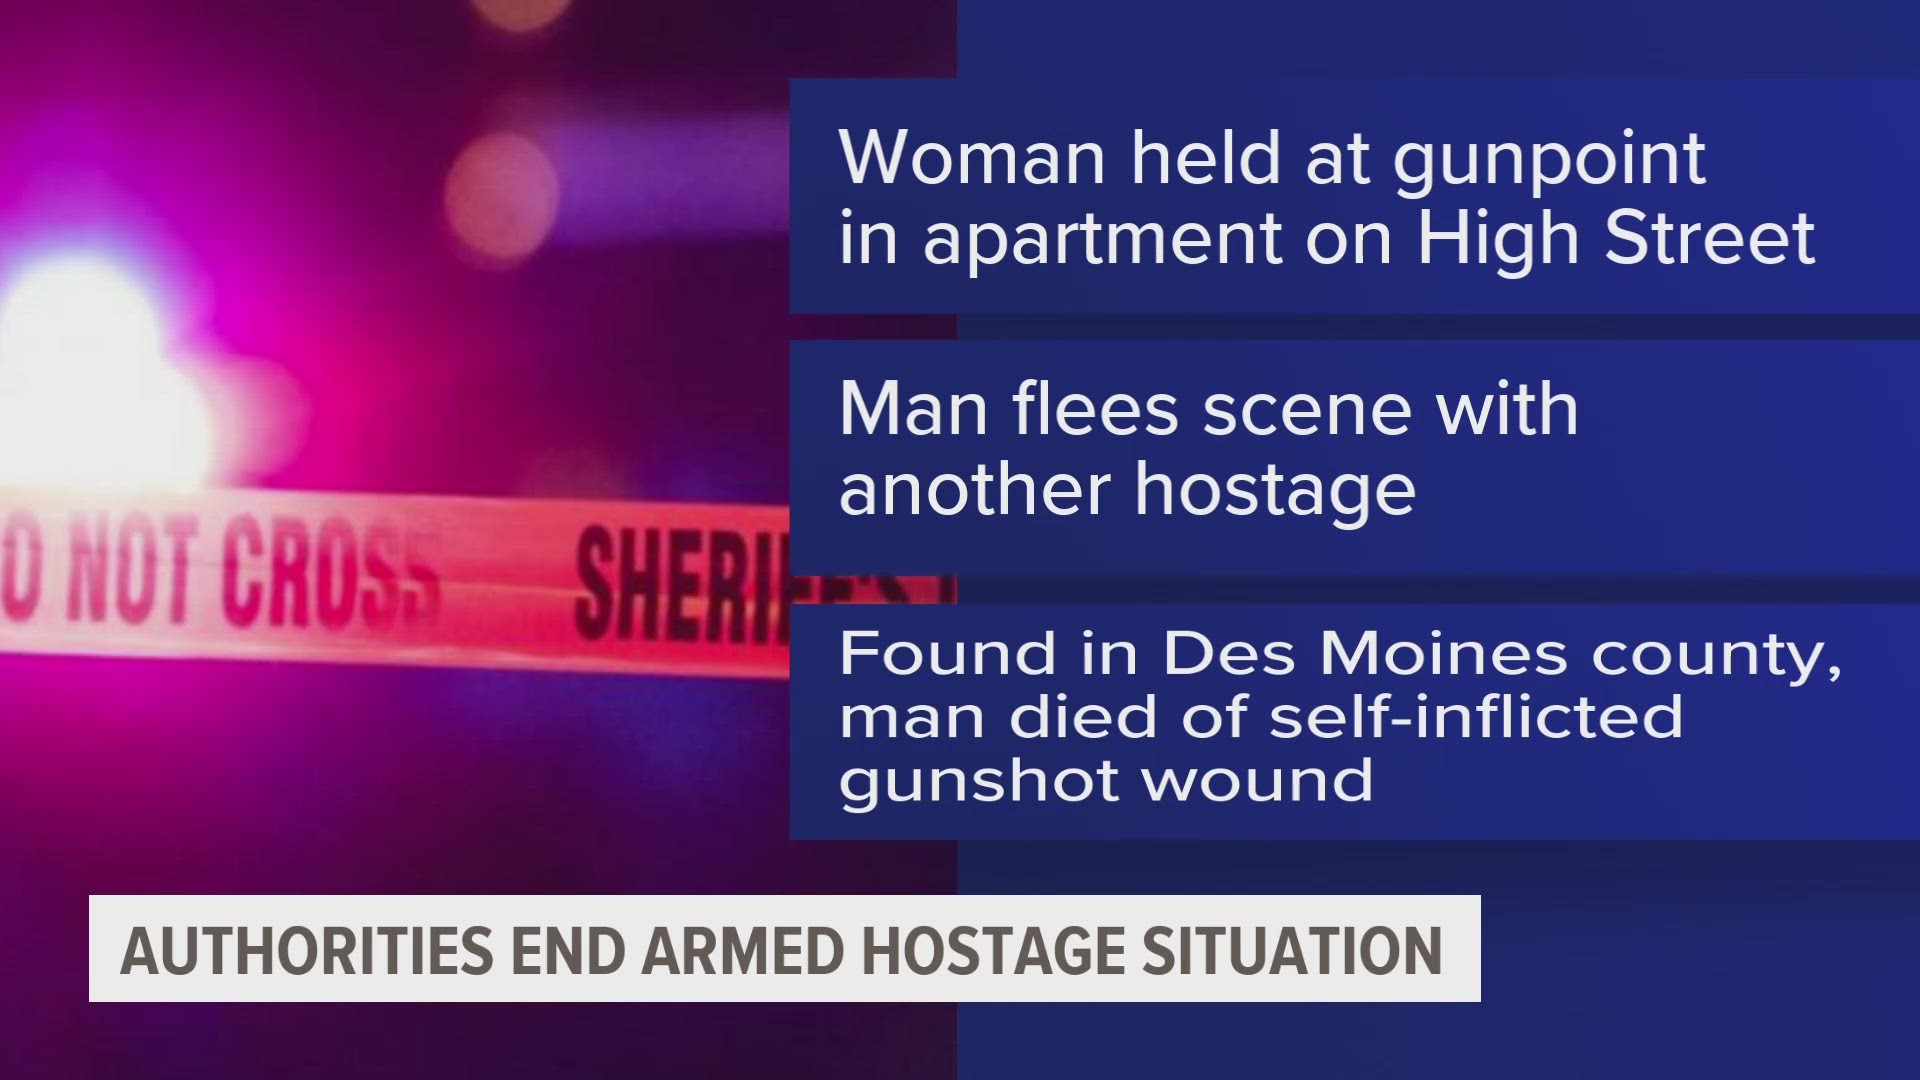 The man died of a self-inflicted gunshot wound, and the woman he took as a hostage was rescued safely in Burlington, Iowa.